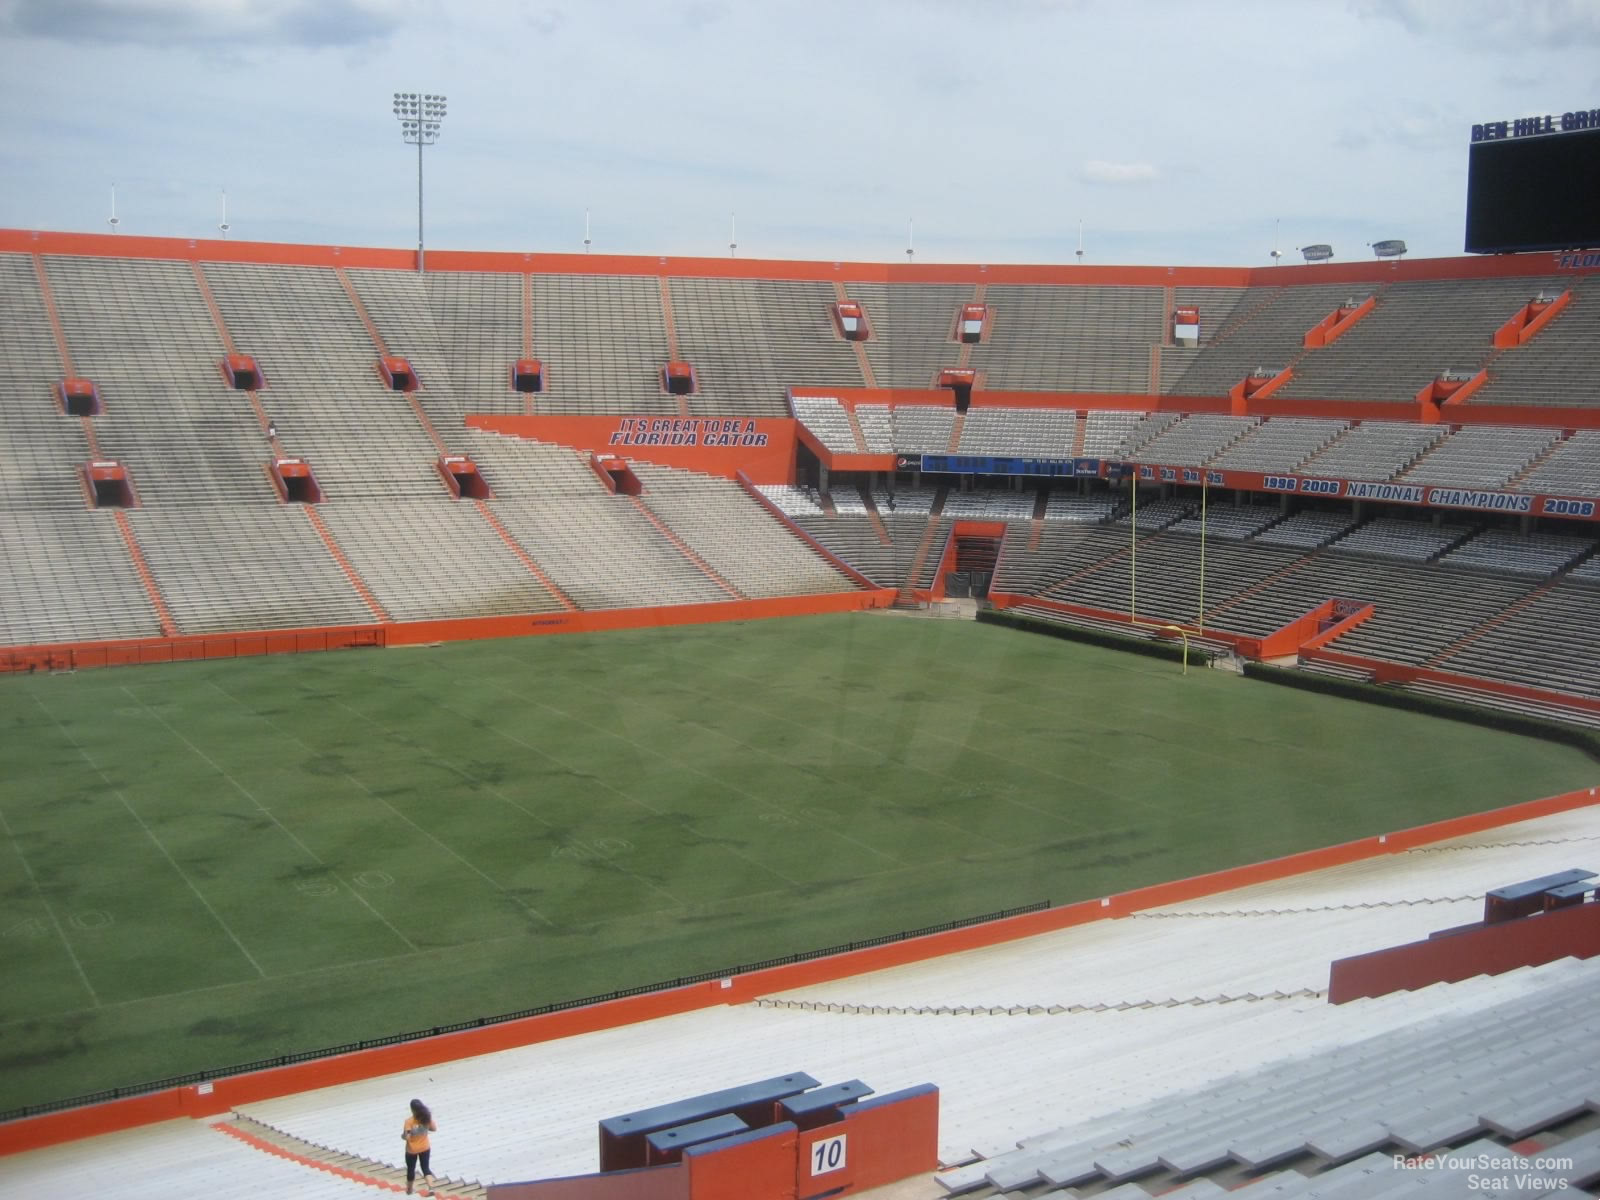 Ben Hill Griffin Stadium Seating Chart With Seat Numbers